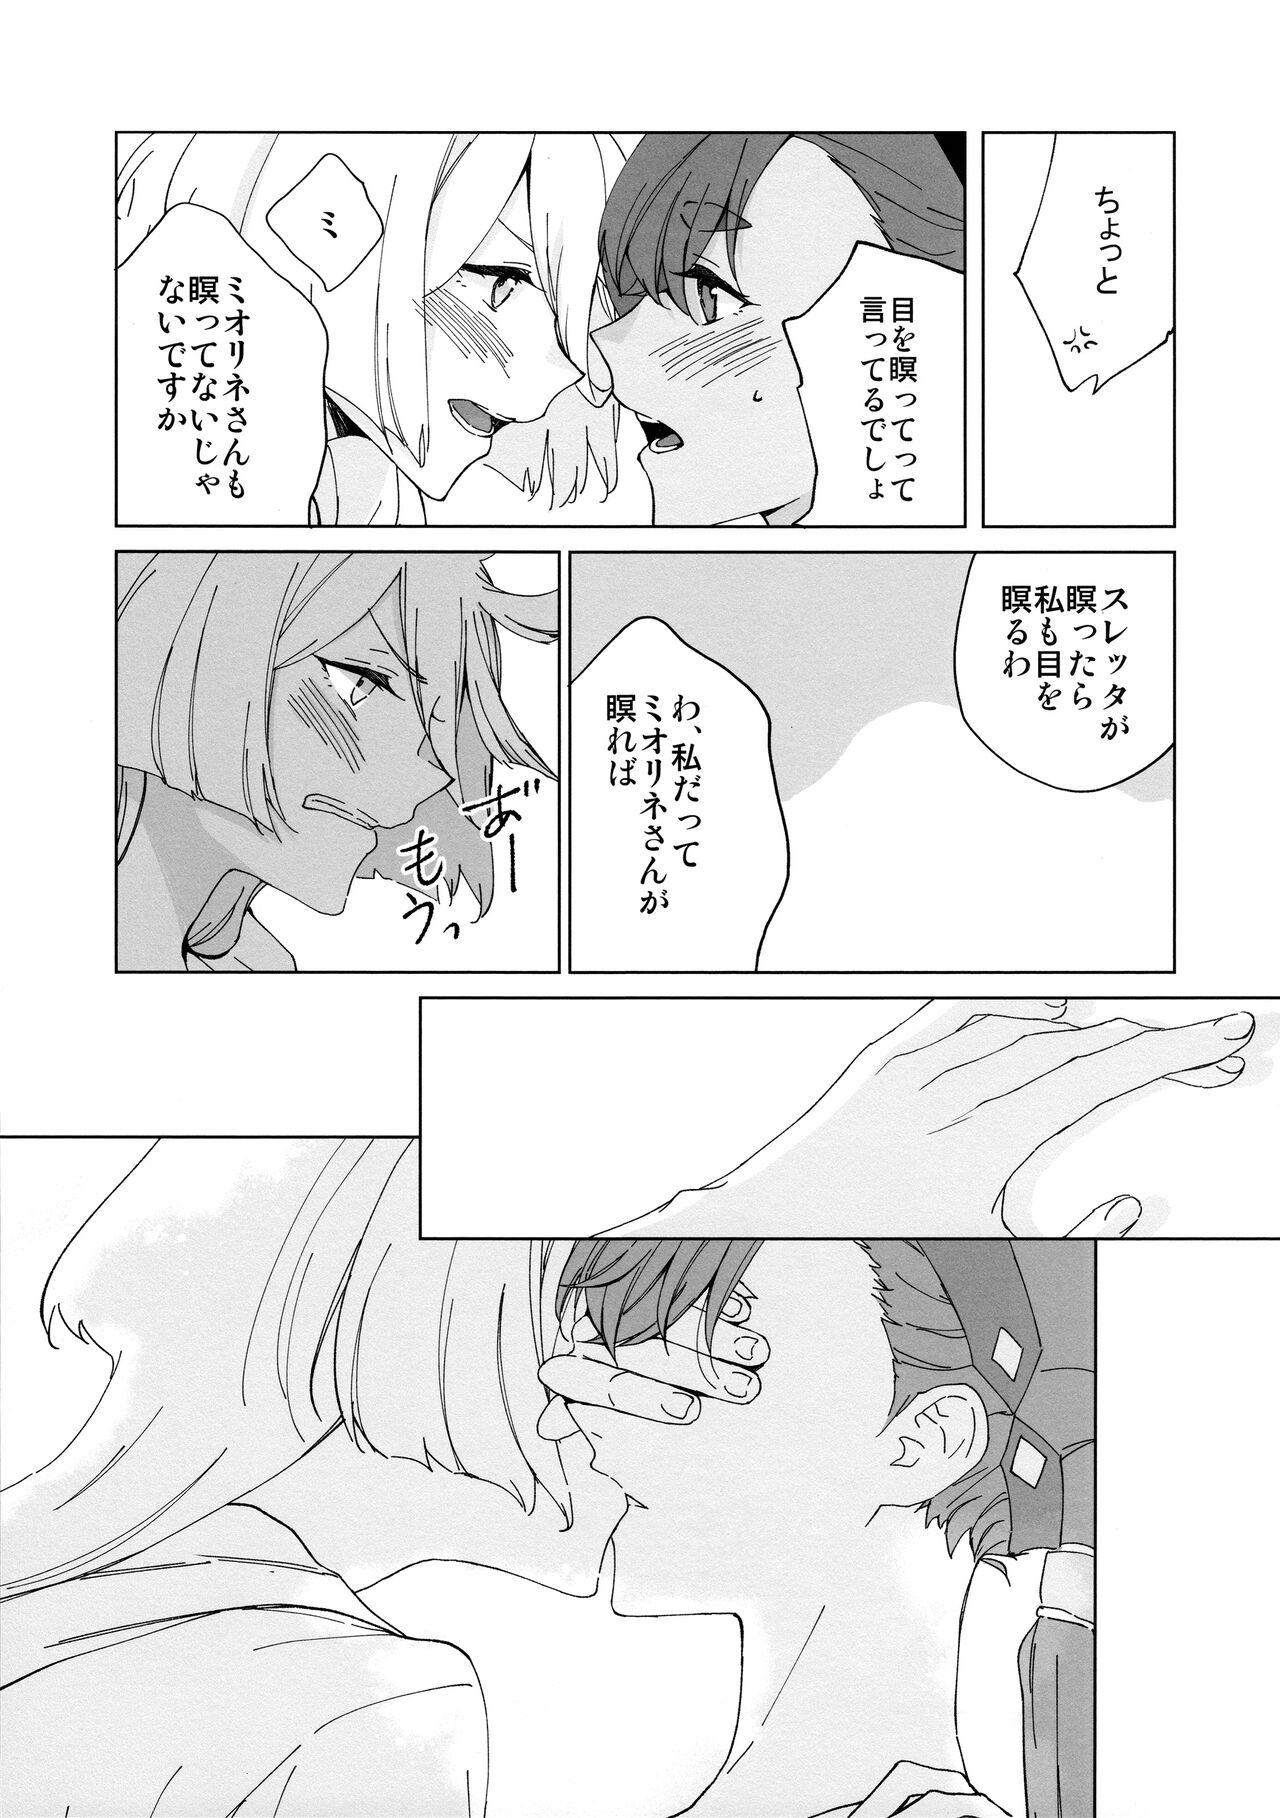 Office Kiss Kiss Kiss - Mobile suit gundam the witch from mercury Sperm - Page 7